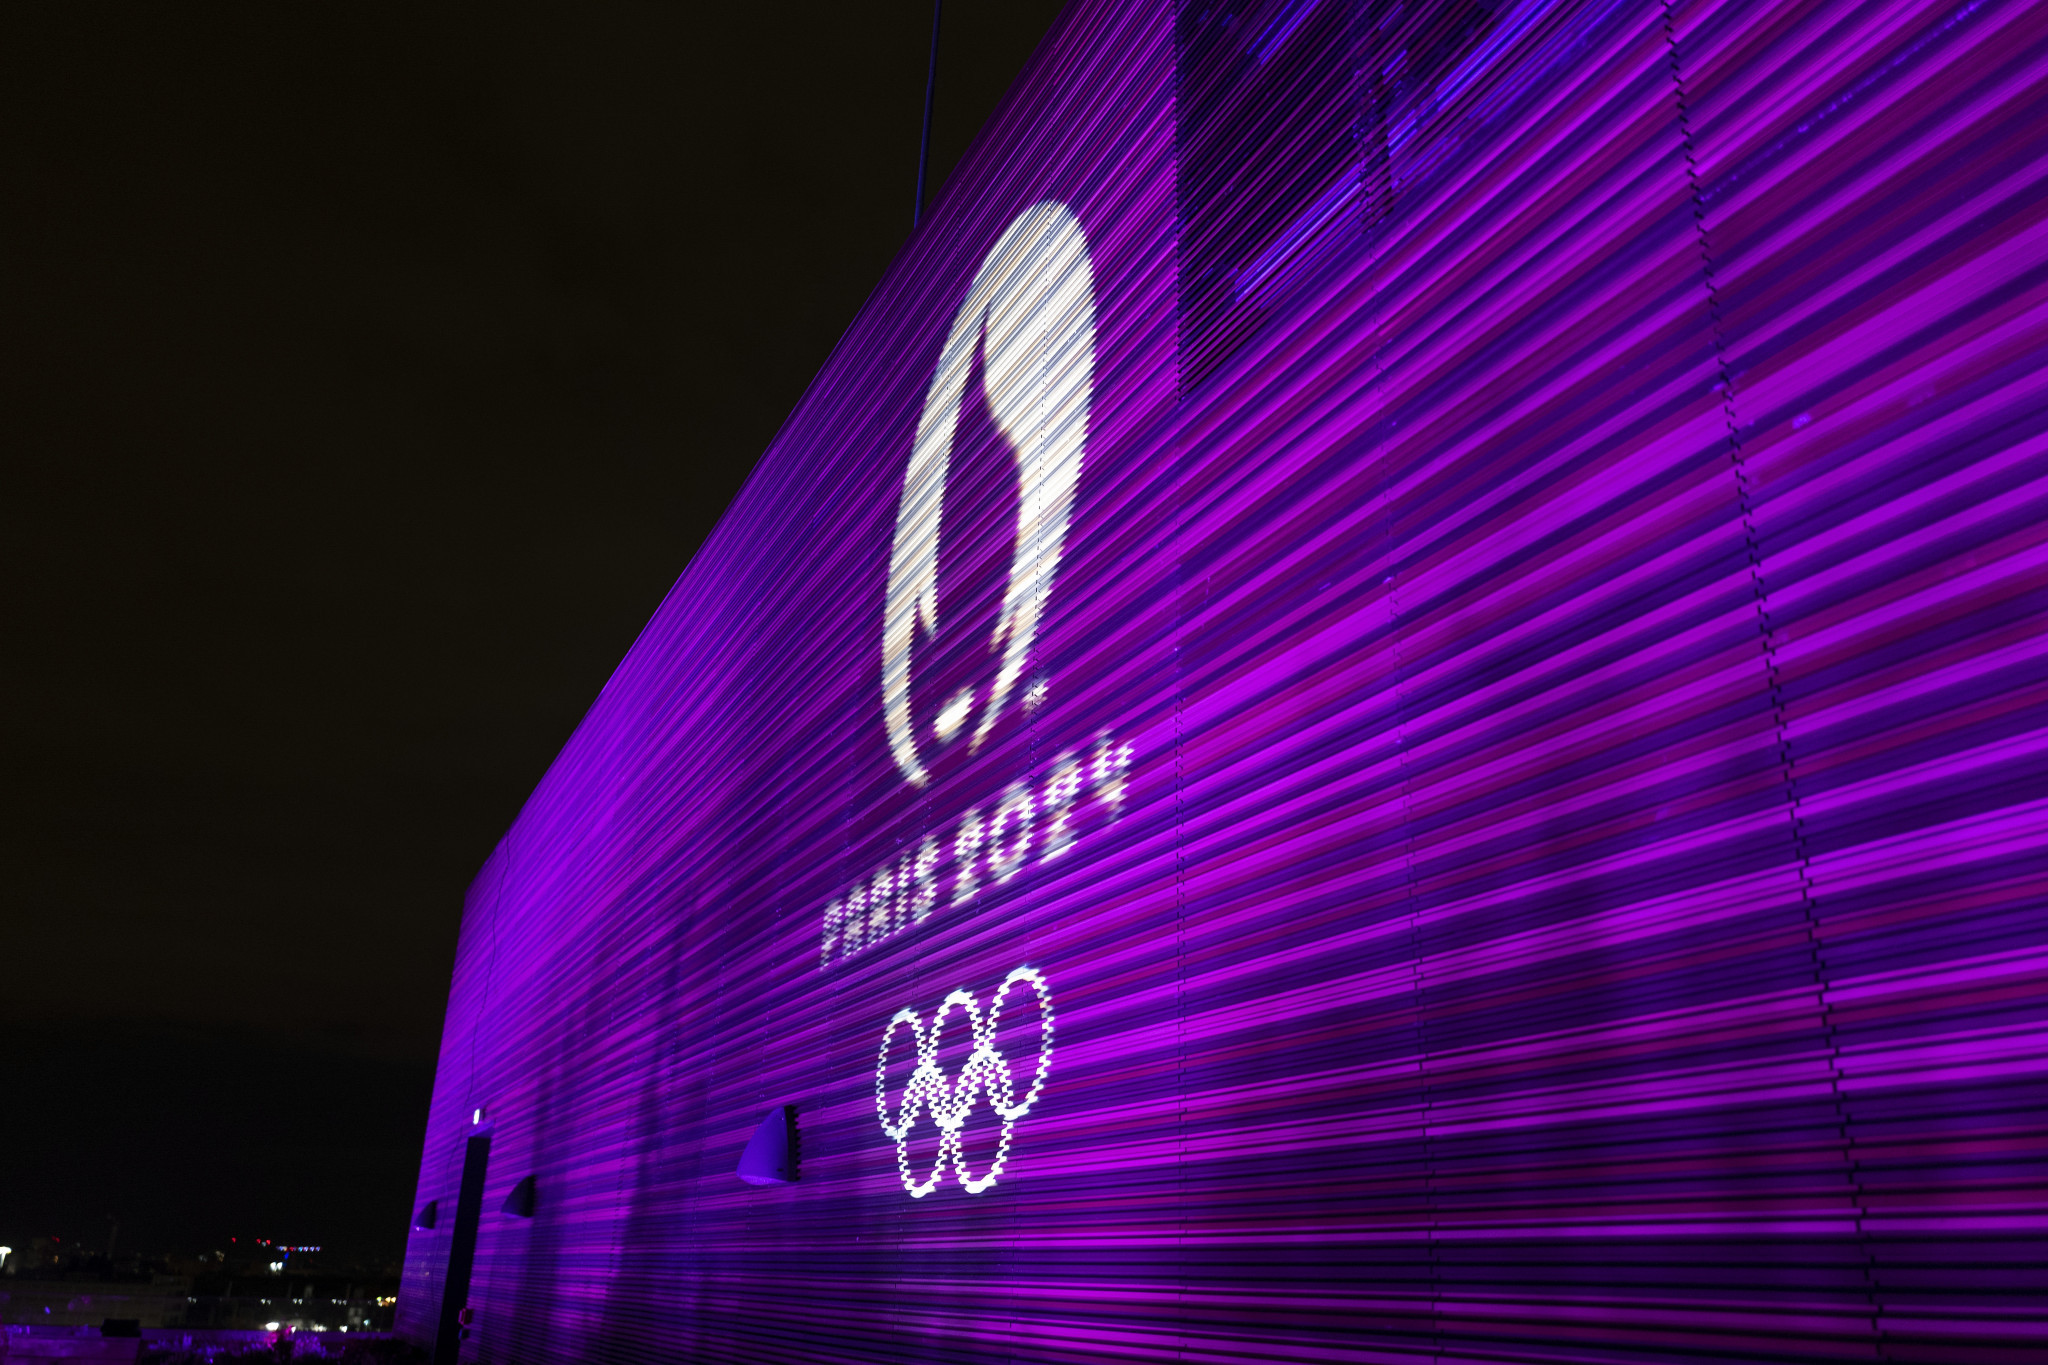 The Working Group aims to help adapt the organisation of the Olympics to economic challenges, with Paris 2024 facing inflationary pressures ©Getty Images